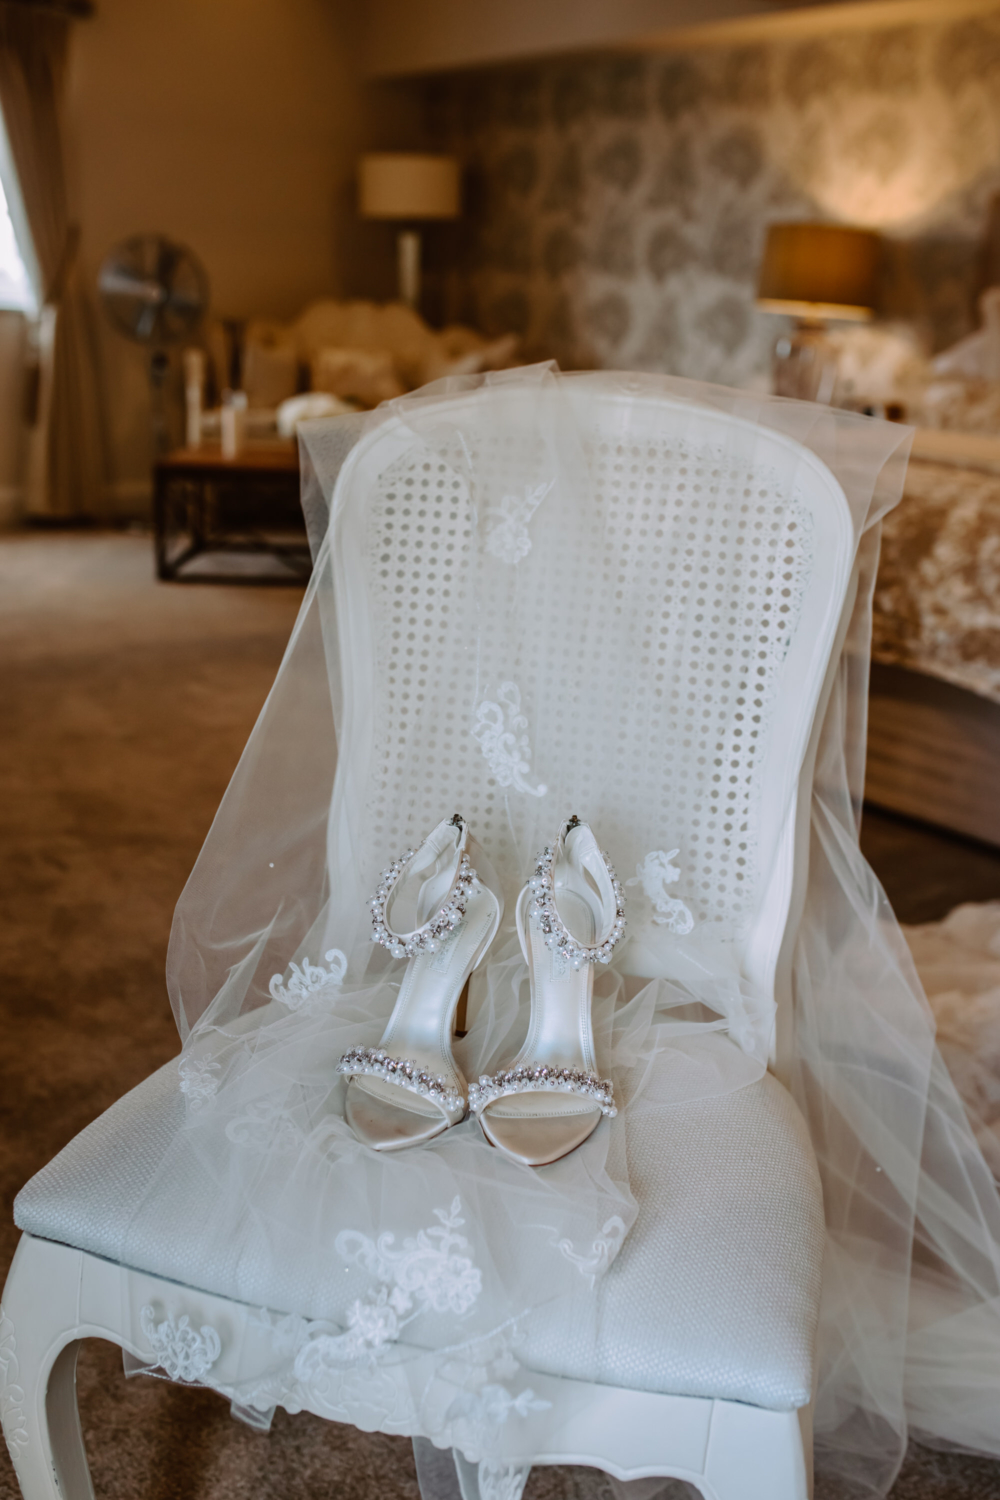 Shoes placed on chair with the veil